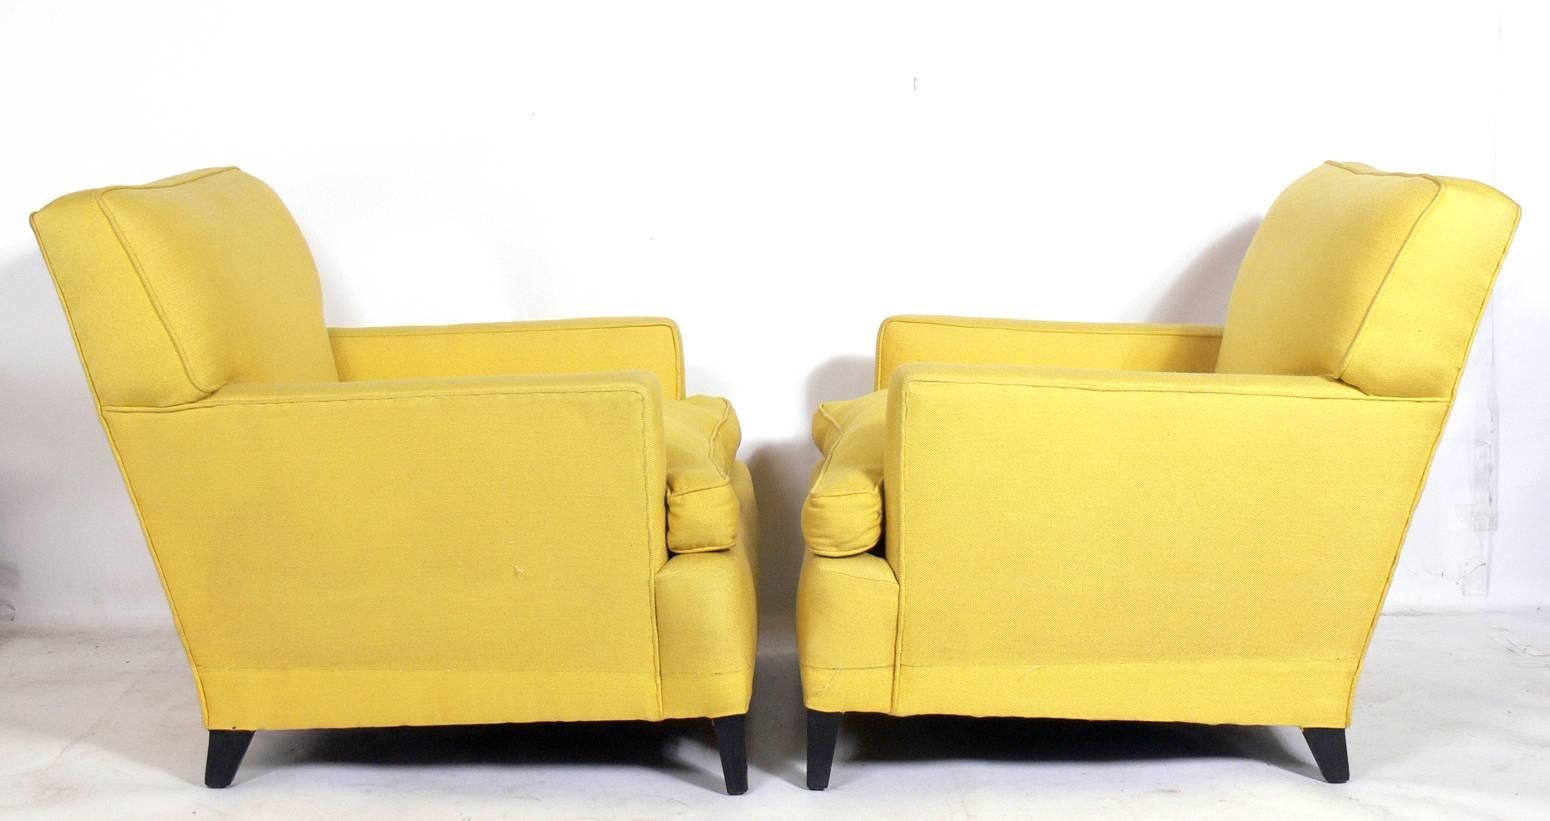 Pair of Mid-Century Modern lounge chairs, in the manner of Dunbar, American, circa 1950s. These chairs are currently being reupholstered and refinished and can be completed in your choice of finish color to the legs and in your fabric. The price